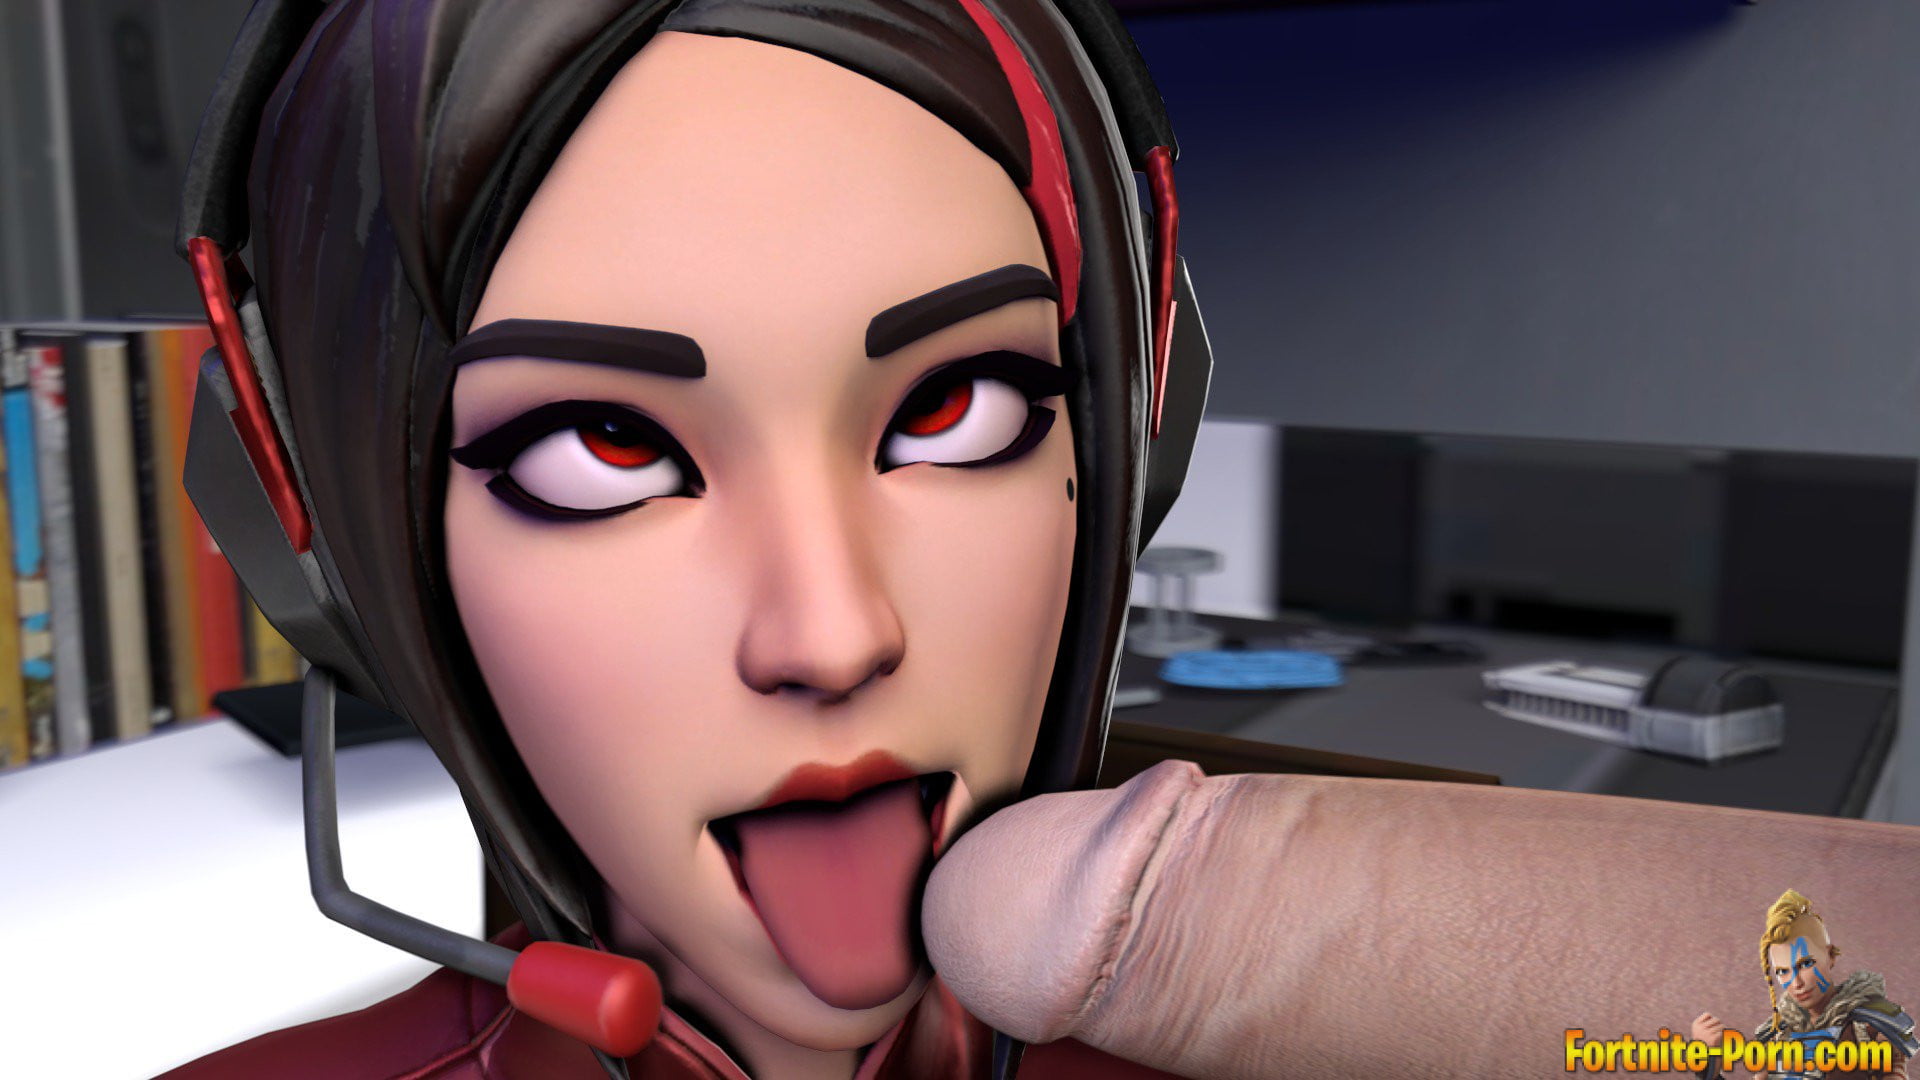 Demi love big dick with the tag Demi in category Other, Fortnite Porn, Fort...